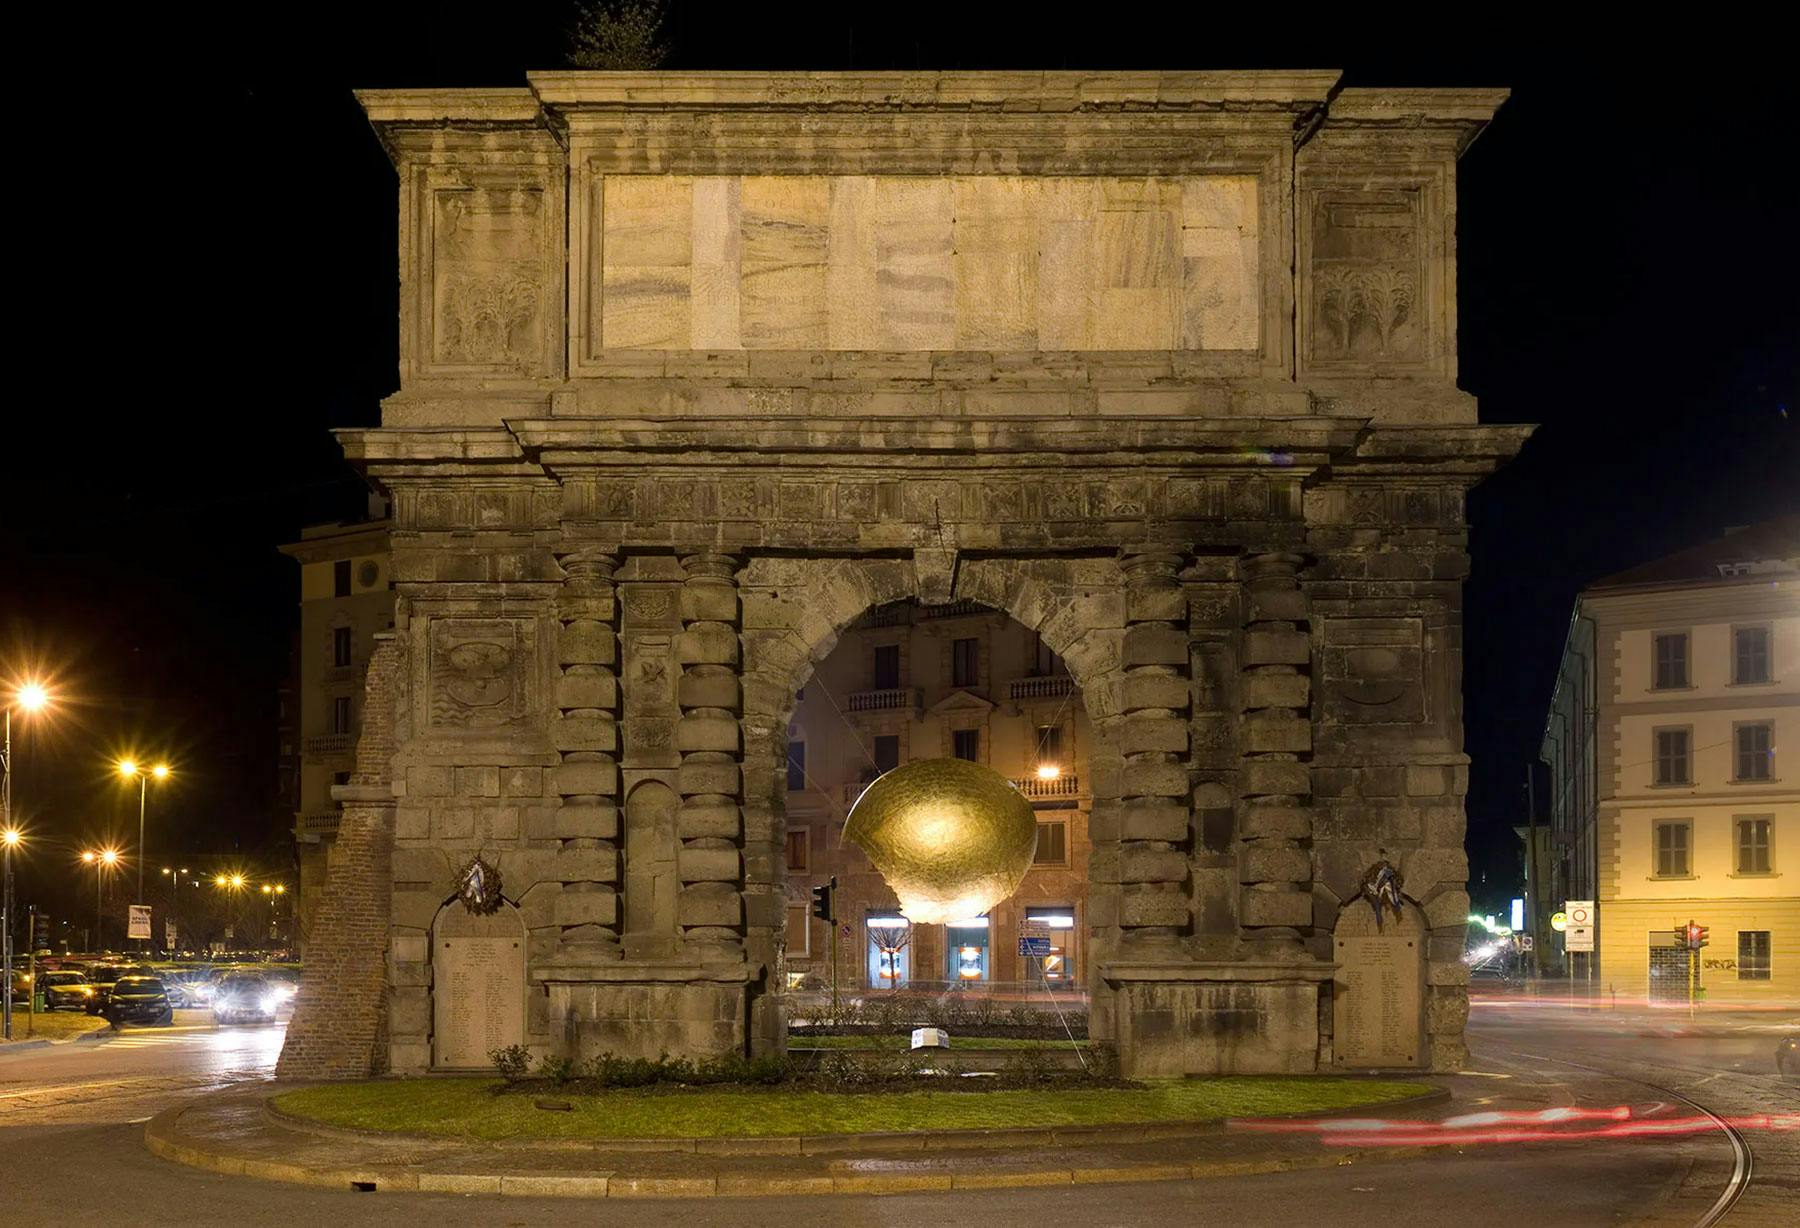 <p>Gilda Bojardi, director of the magazine Interni, asks Enzo Catellani to create a work to be installed in Milan: the result is “La sfera incompiuta”, the unfinished spheres, 3 meters in diameter, made of exploded fiberglass, lined with gold coloured leaf outside and with silver coloured leaf inside, installed under the arc of Porta Romana, to light it for the whole duration of the events related to the fair Salone del Mobile.</p>
